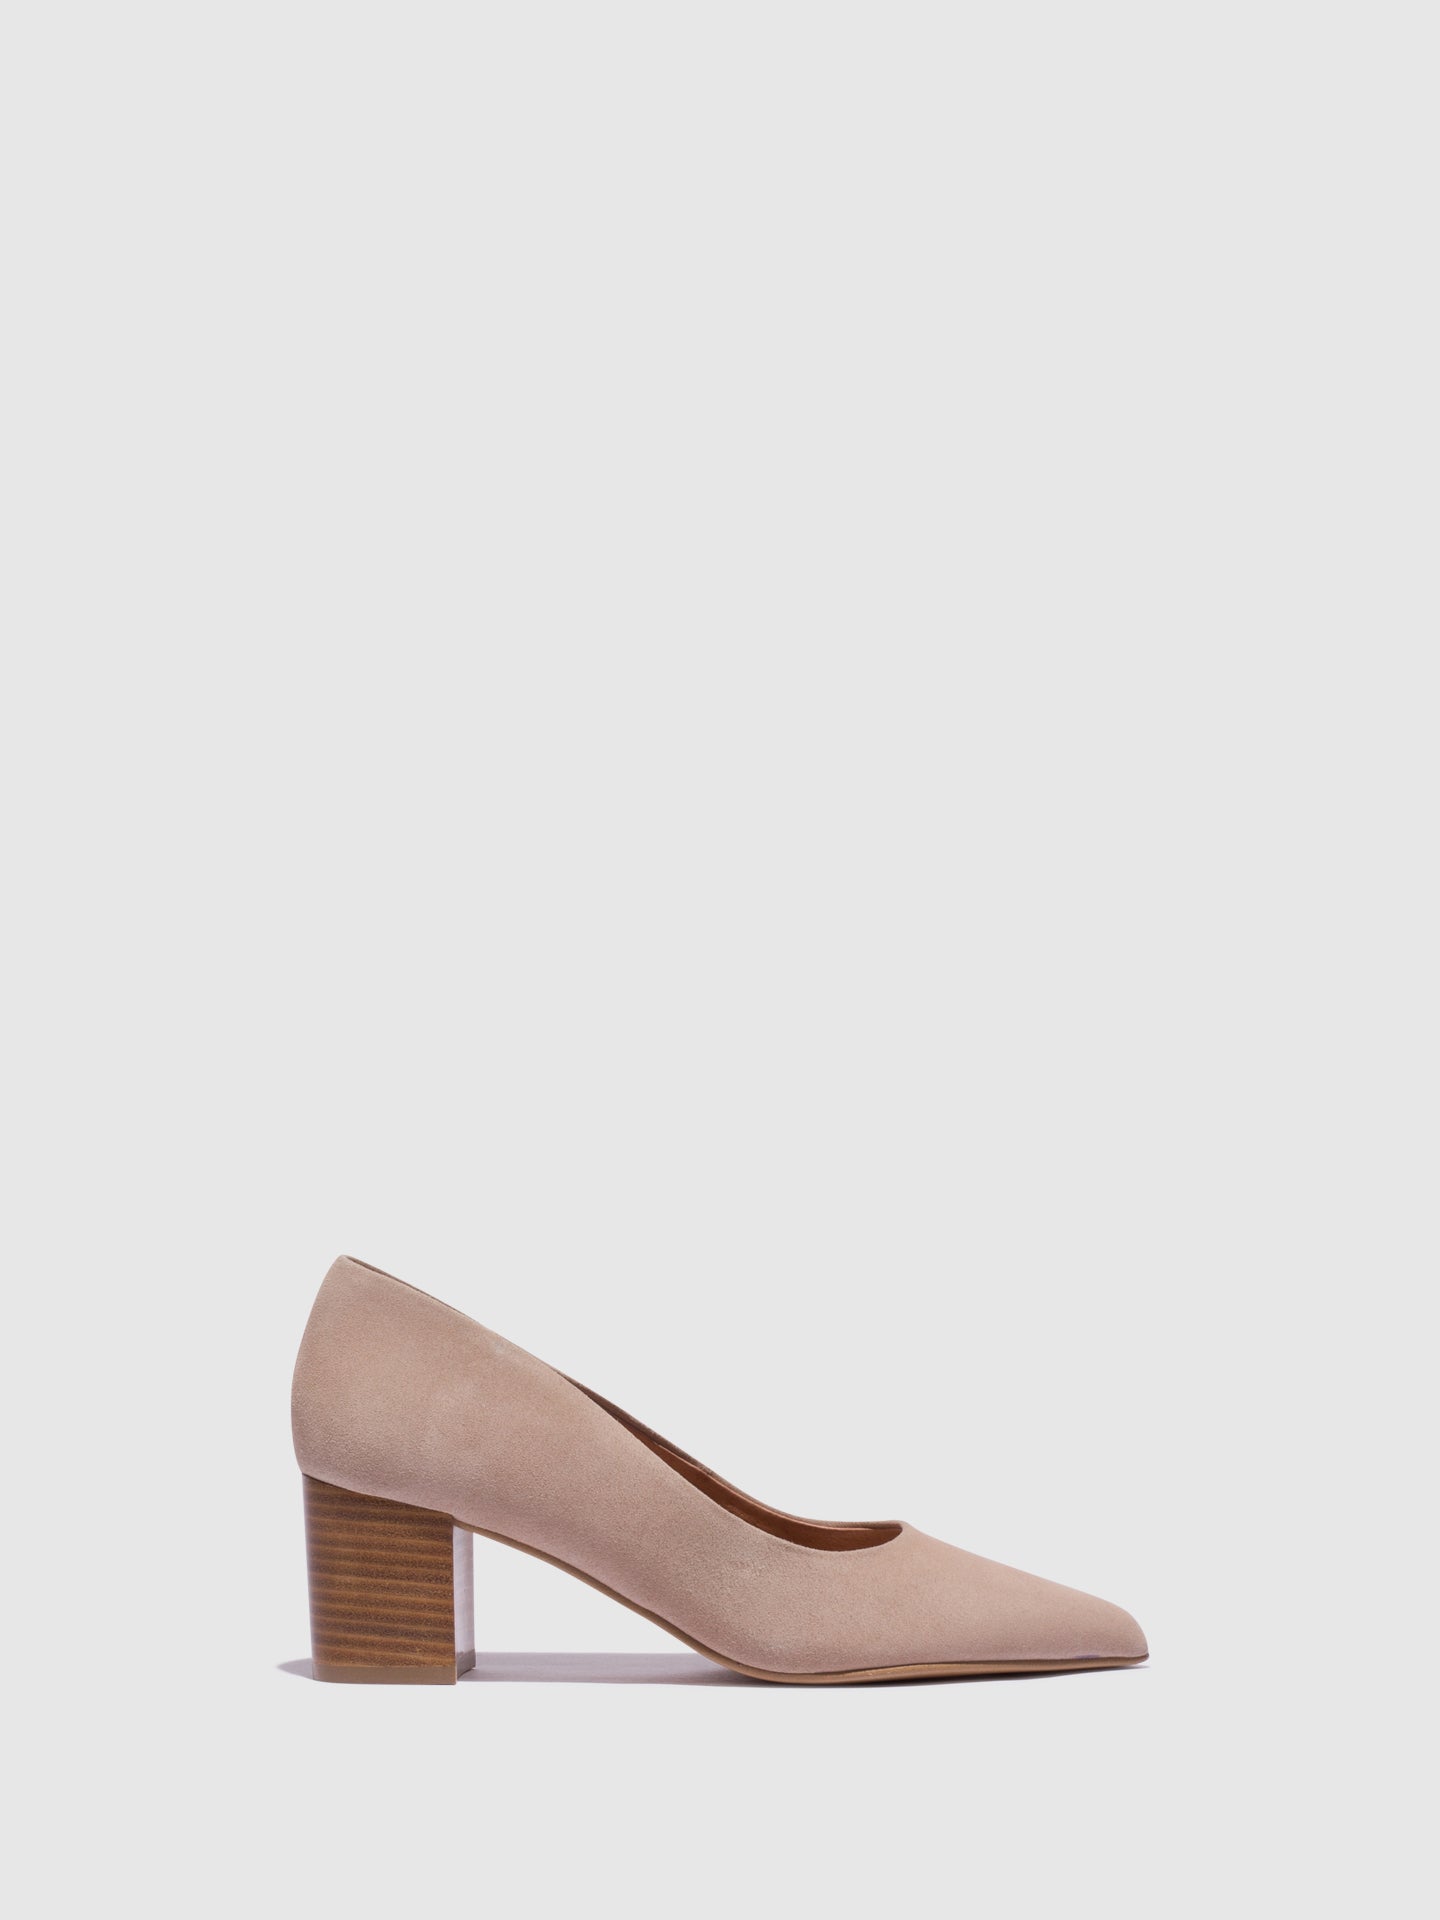 Foreva Nude Classic Shoes